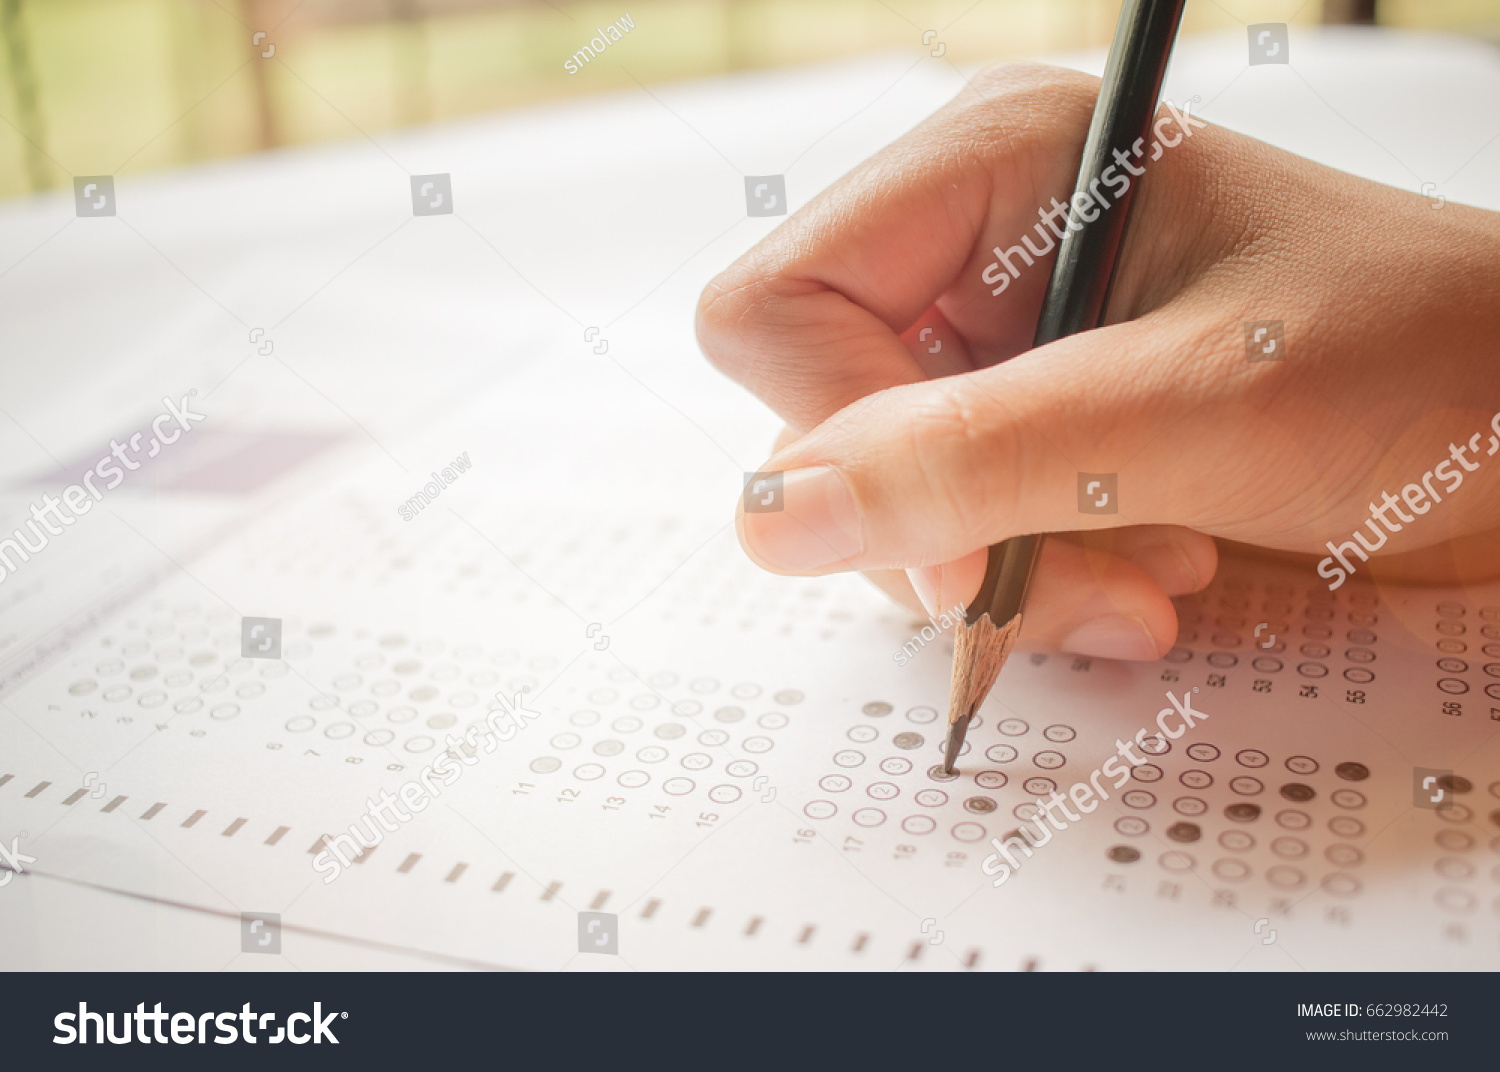 hand student testing in exercise and taking fill in exam carbon paper computer sheet with pencil at school test room, education concept #662982442